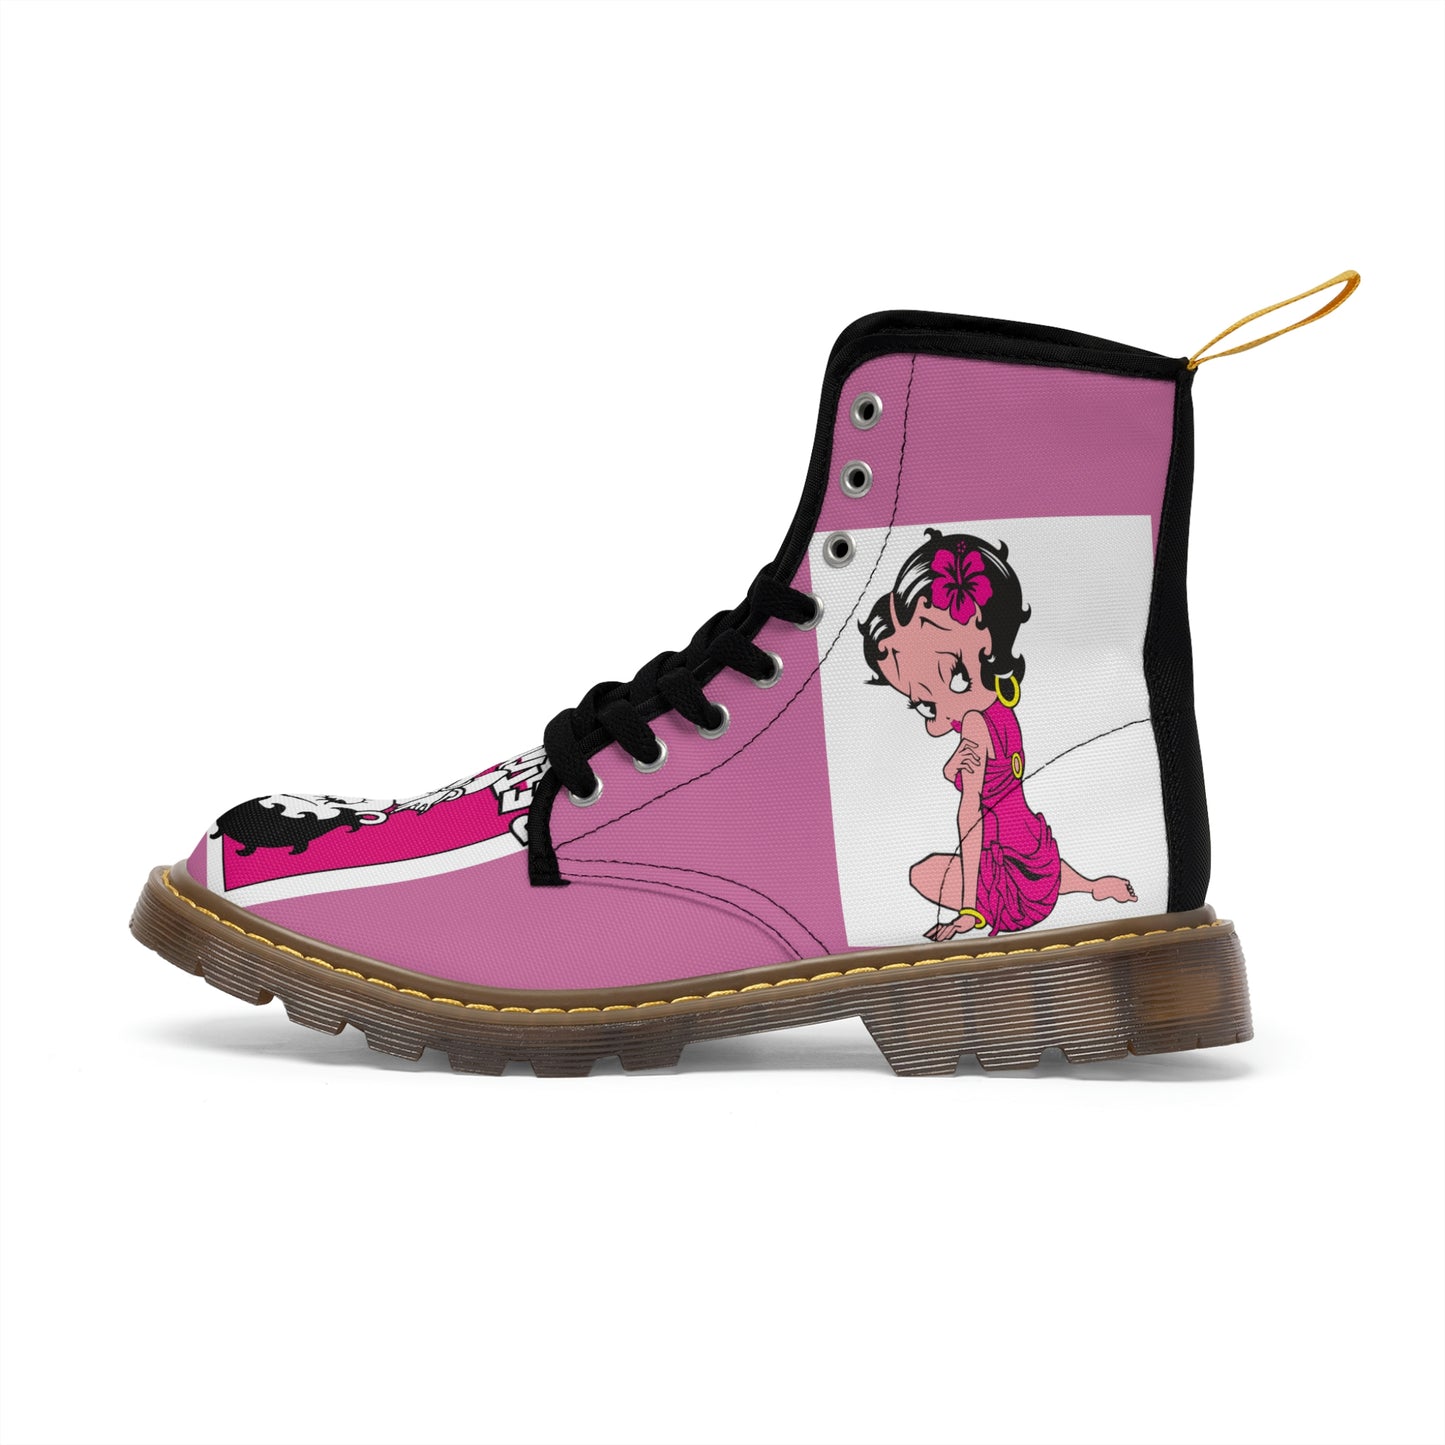 Women's Canvas Pink Boots